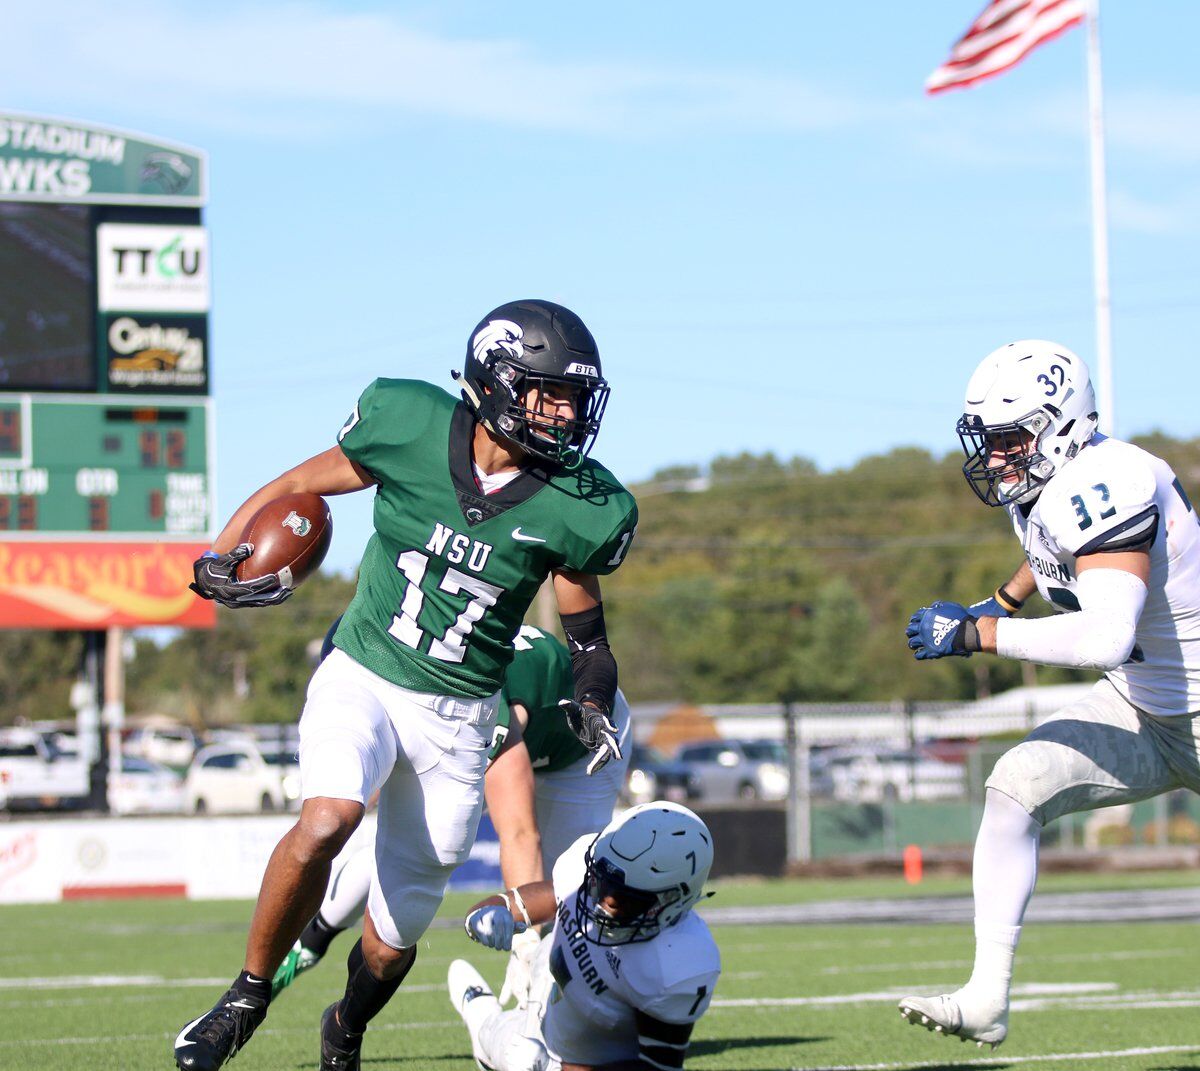 NSU schedules football RiverHawks will play at Tarleton State in March 2021 Sports tahlequahdailypress pic